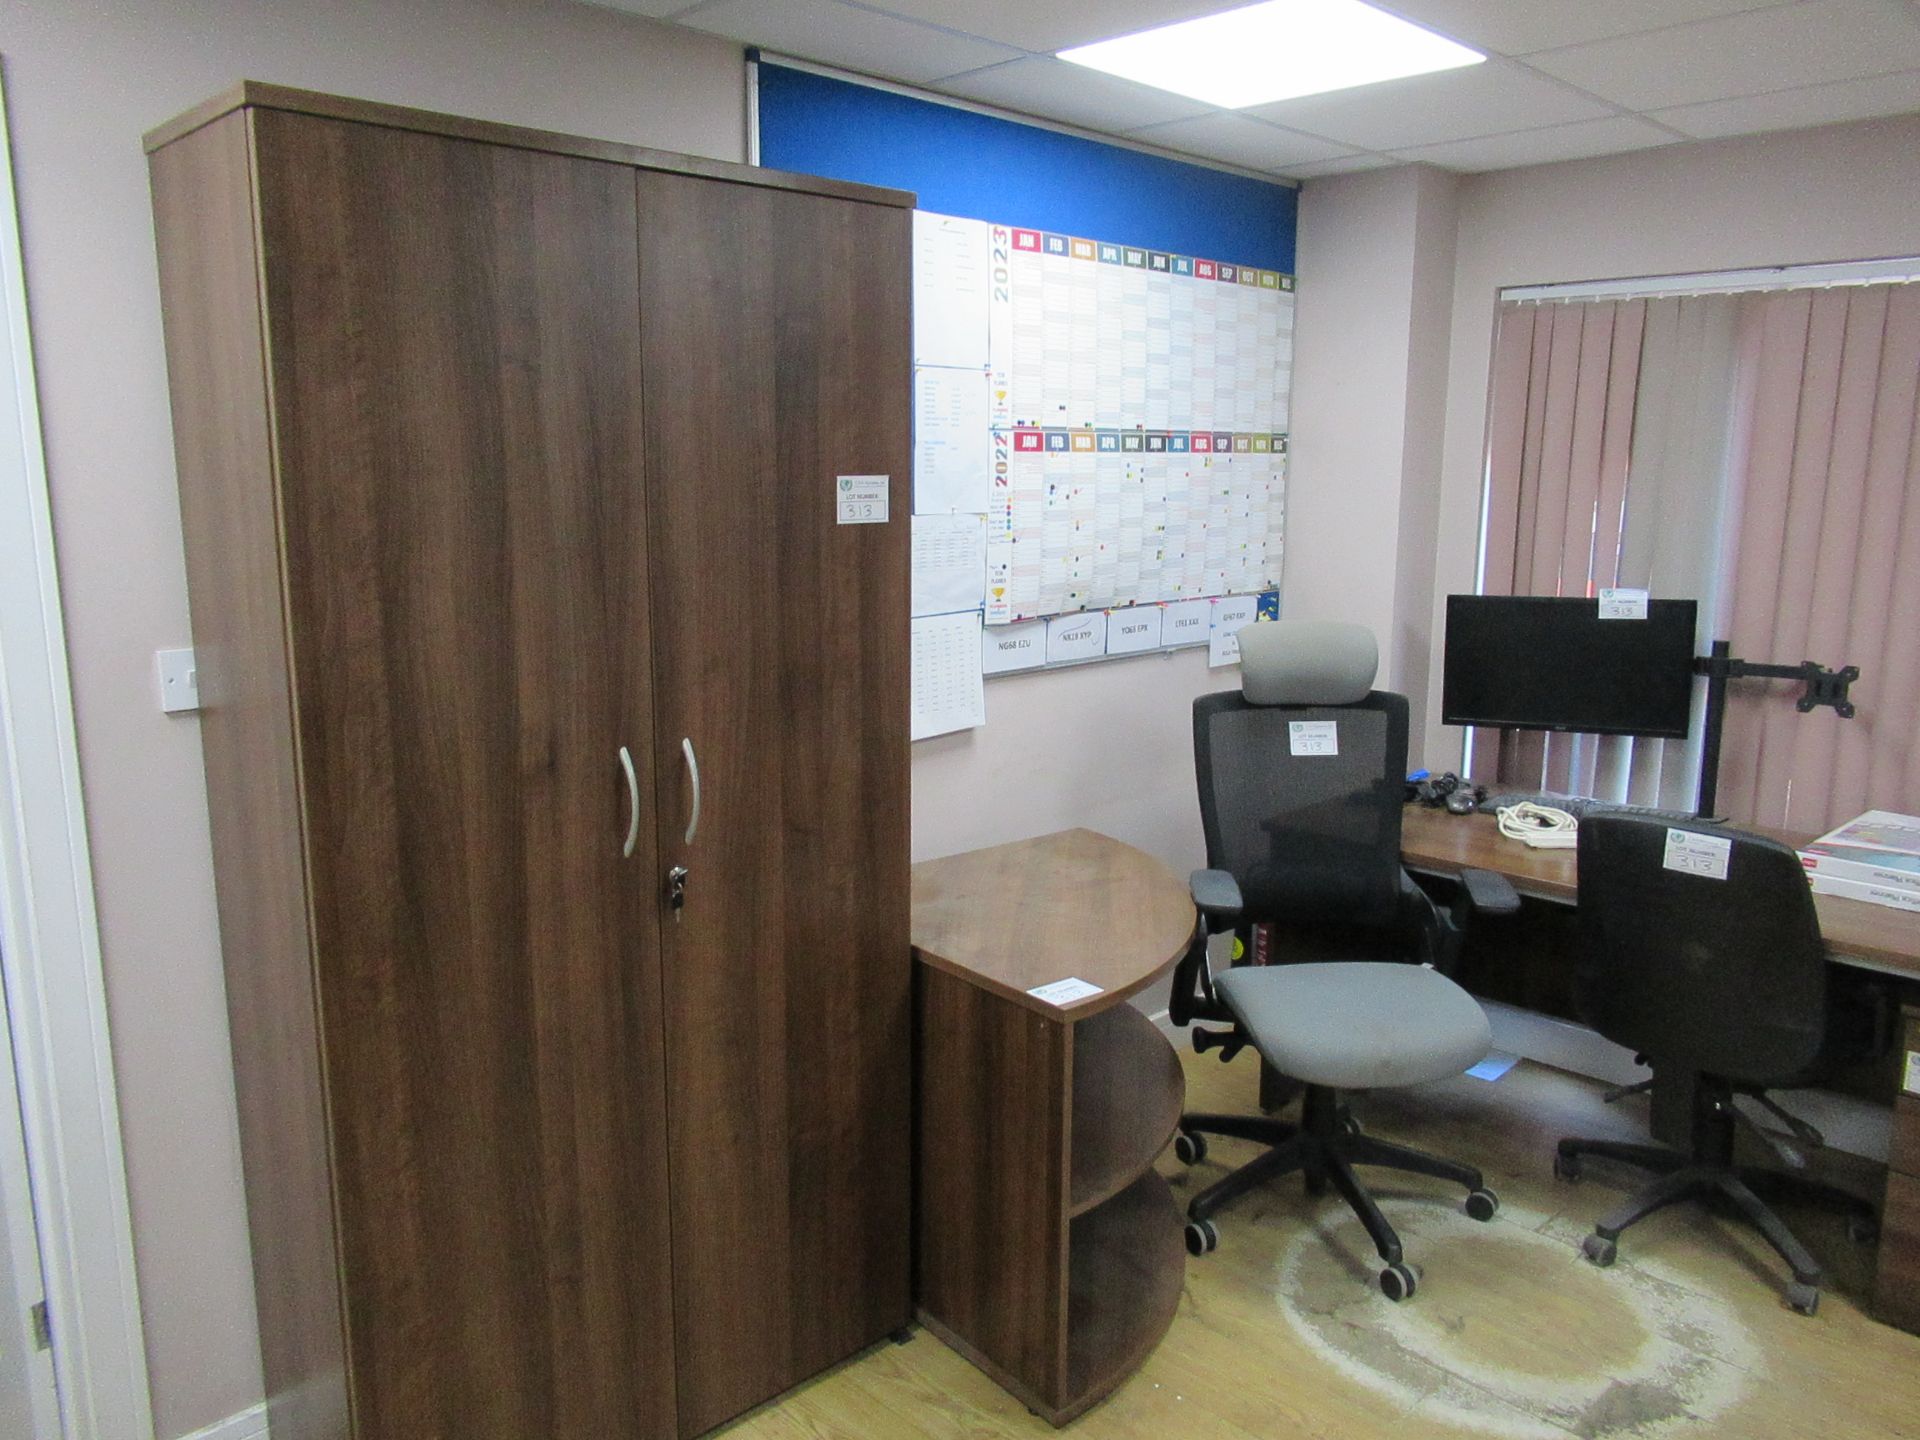 Office Furniture and Related Contents of Back Office - Image 2 of 10